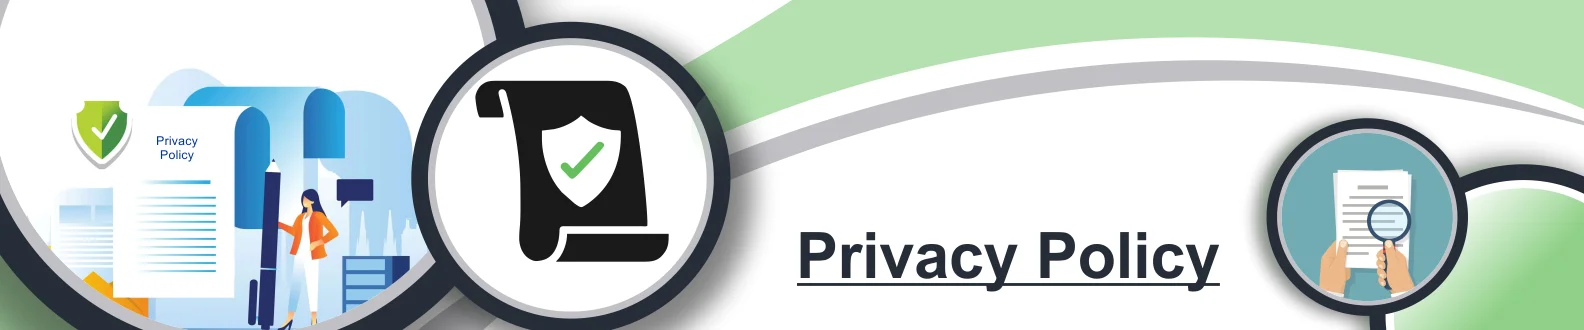 privacy-banner-image